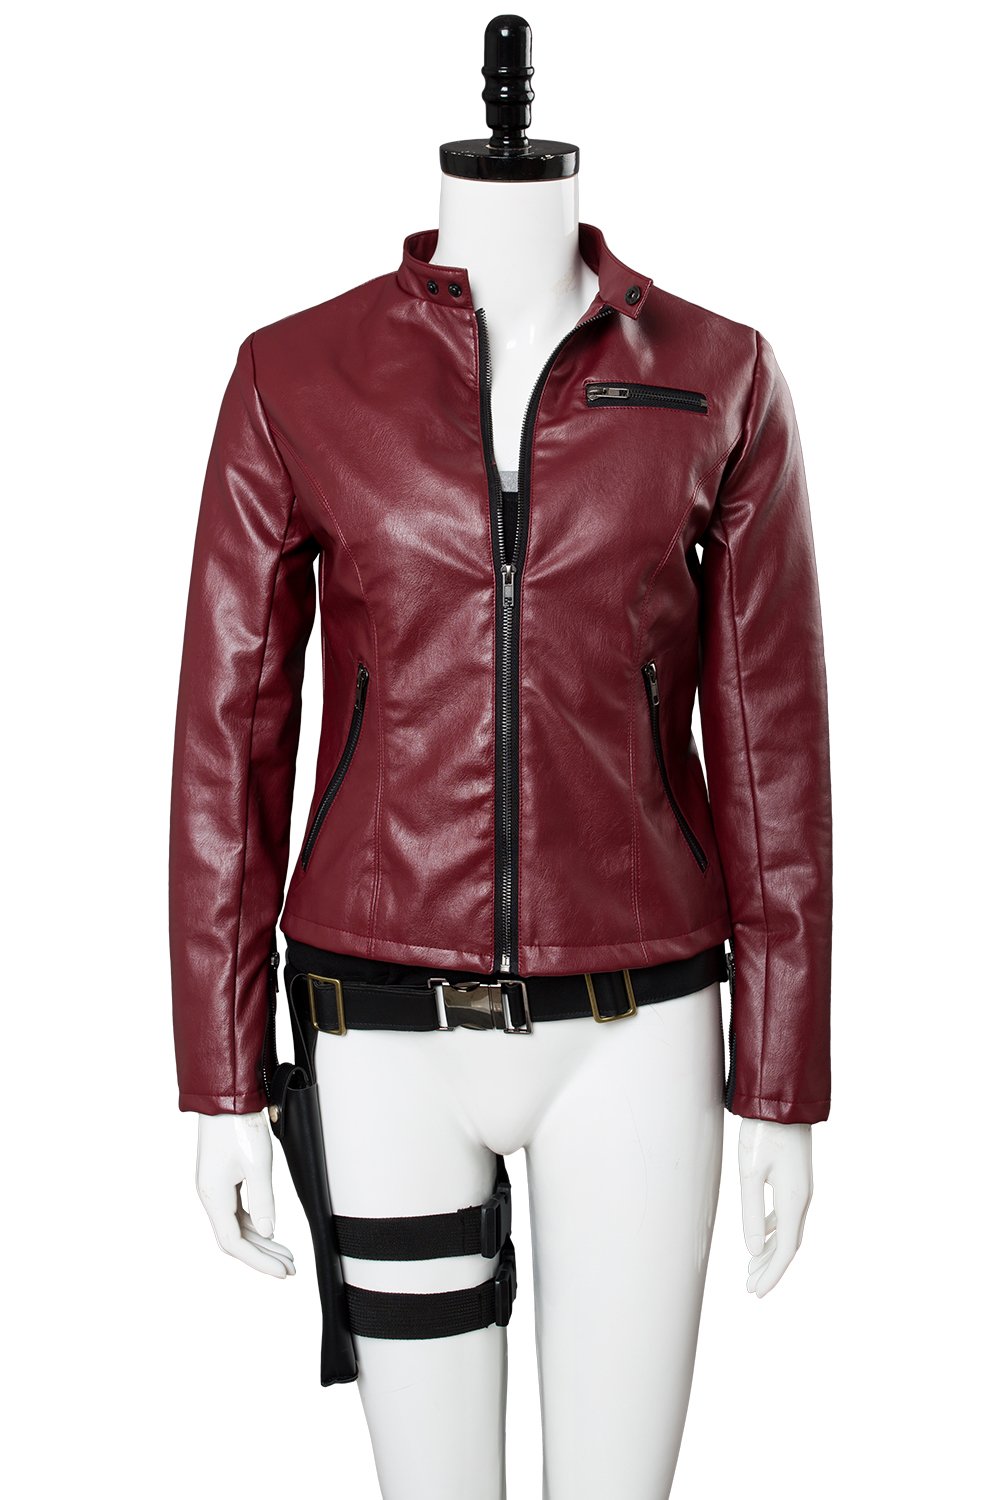 Claire Redfield Cosplay Costumes Resident Evil 2 Remake Edition